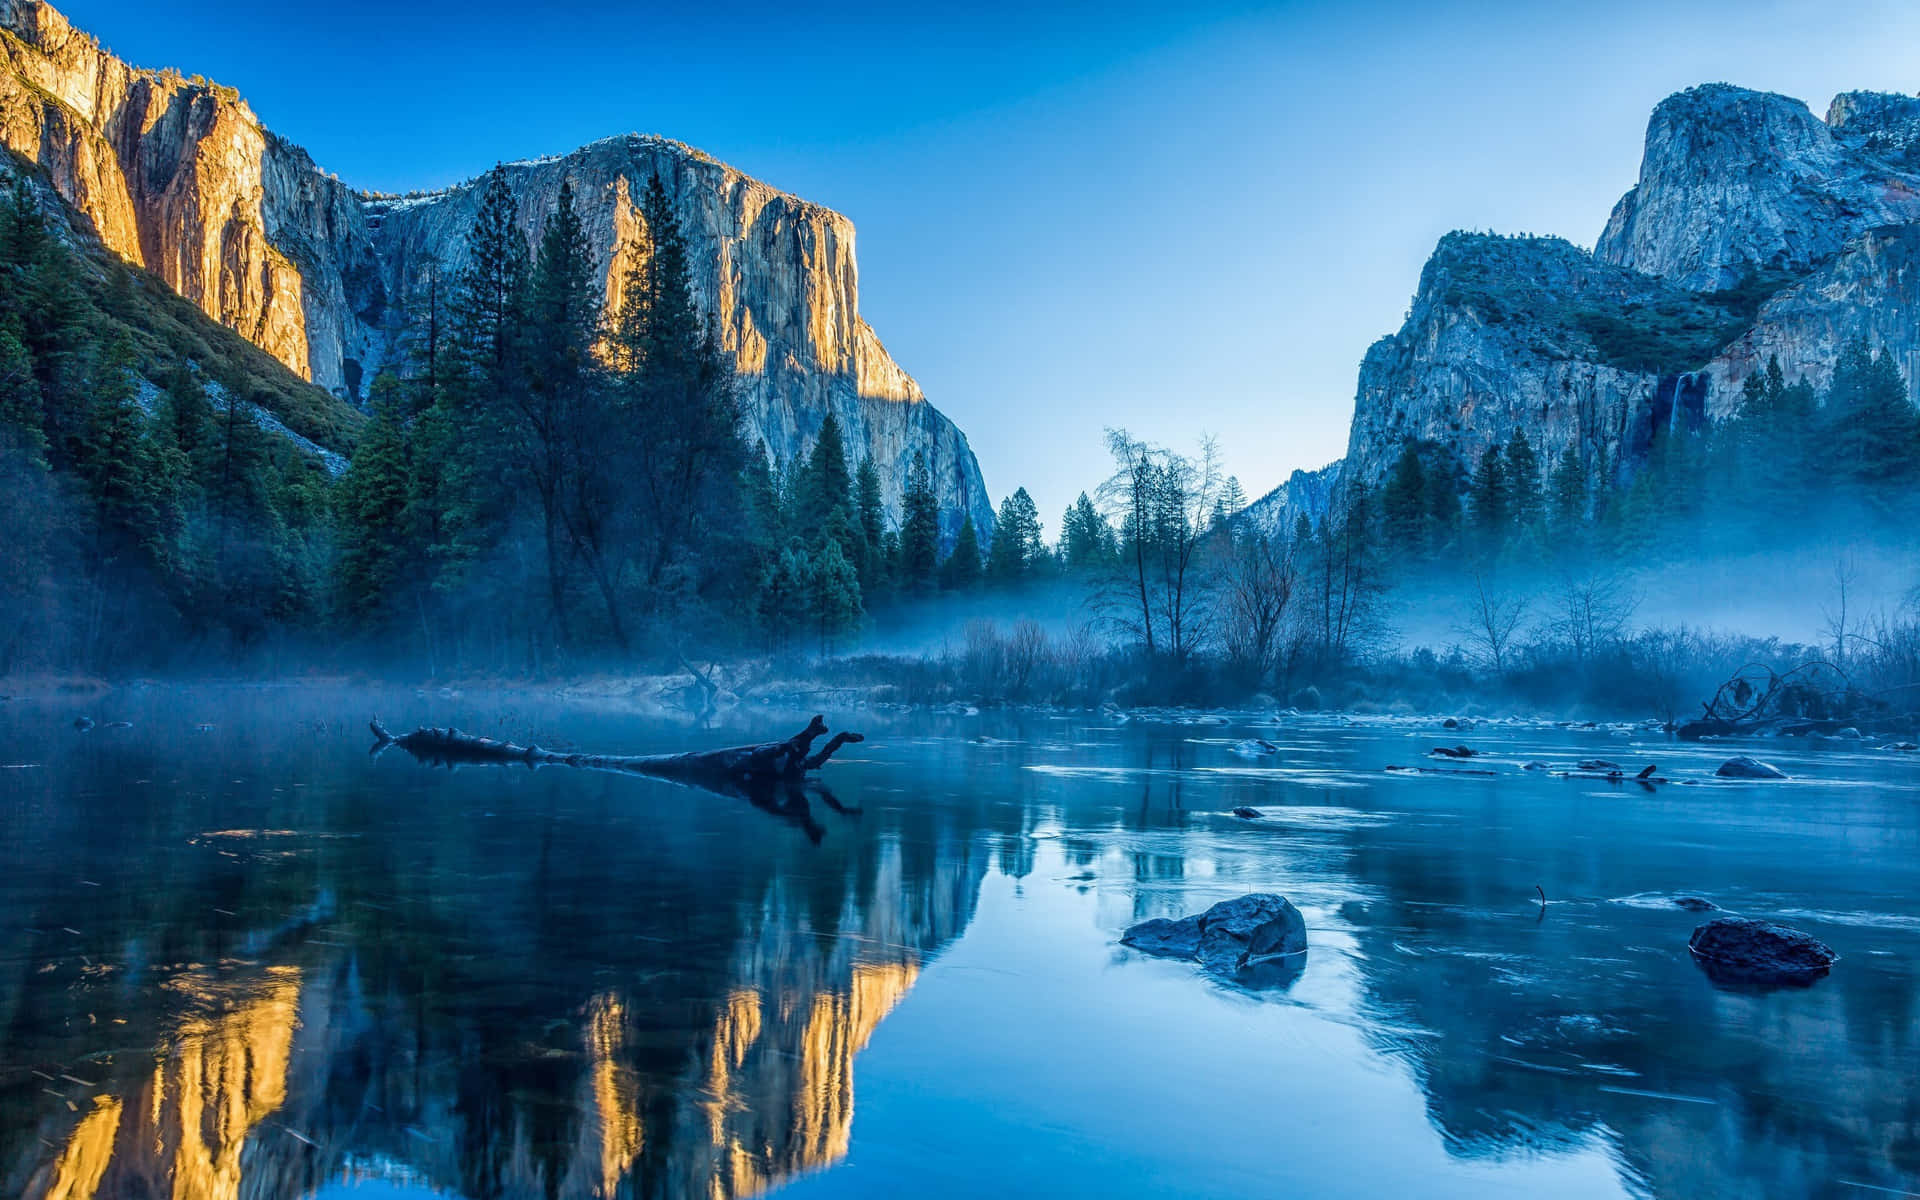 Experience the great outdoors in High Sierra Wallpaper